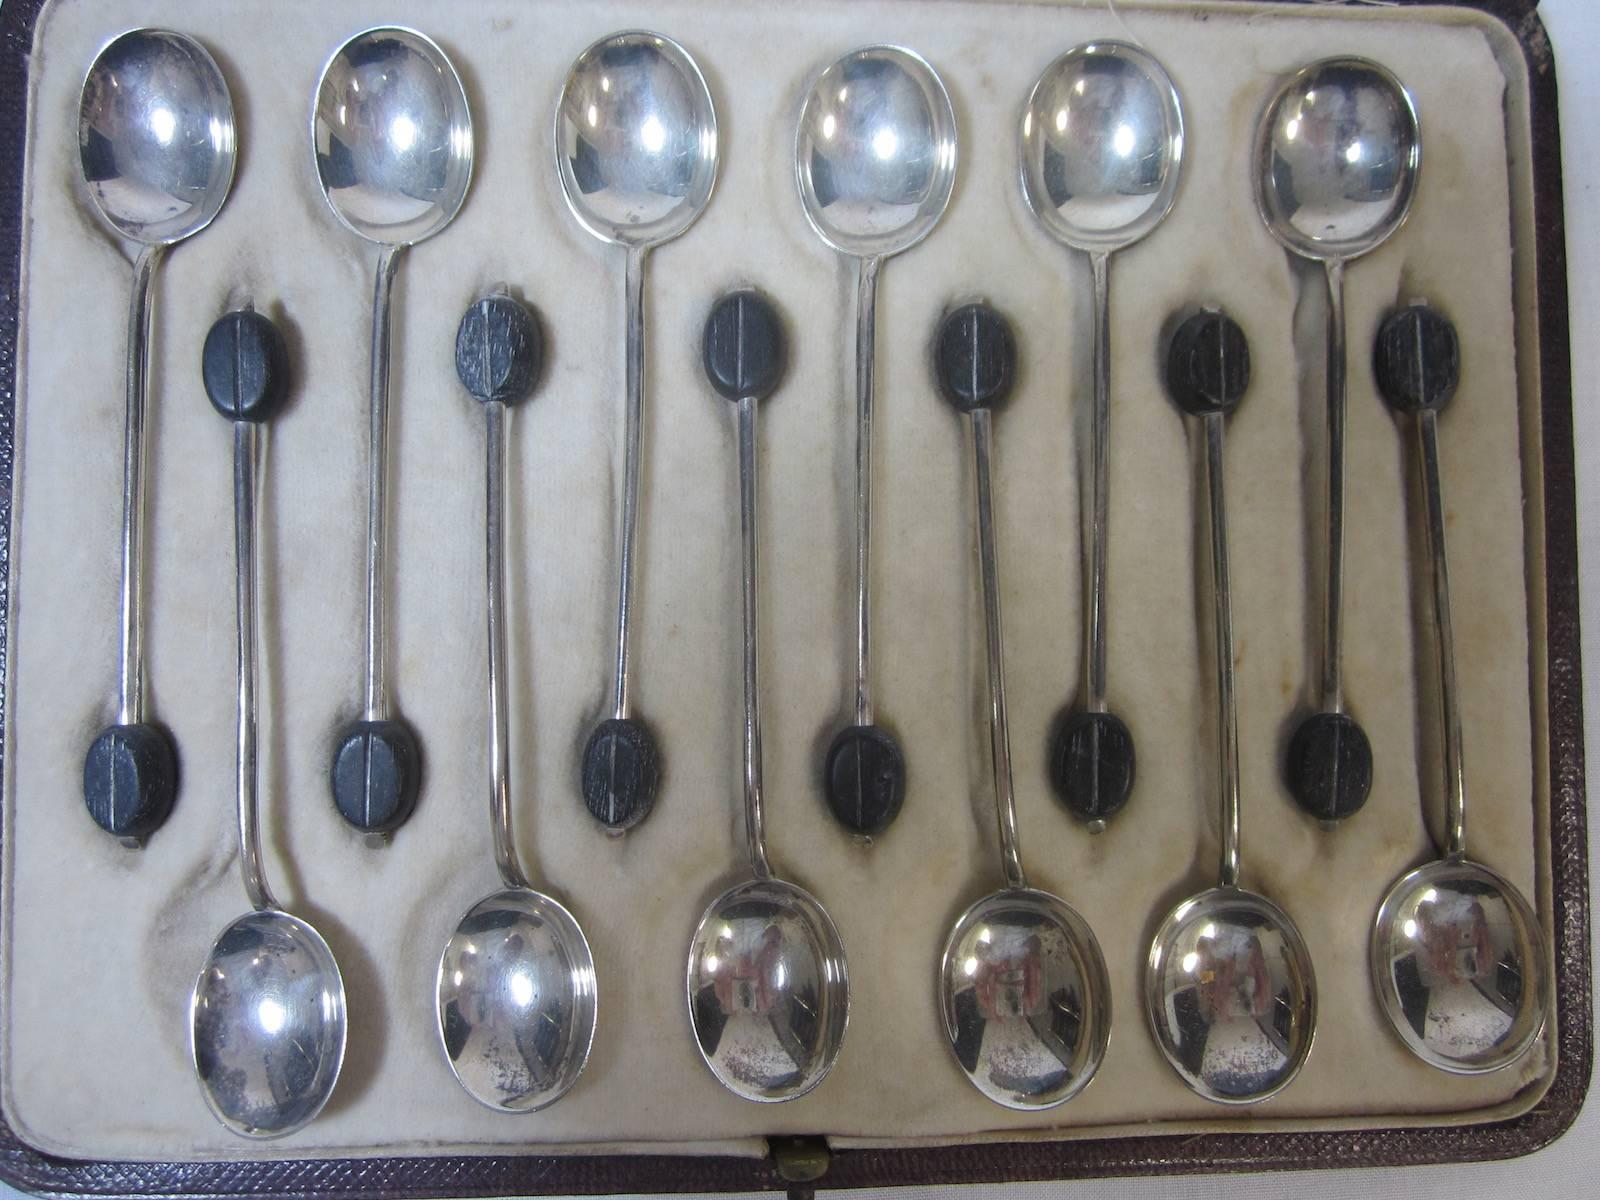 Set of 12 Asprey & Co. sterling silver boxed coffee spoons, in an fitted Asprey box.
Hallmarked Sheffield 1911,
Total weight including the coffee beans, 3.2 ounces, 92 grams
Box has some wear commensurate with age.